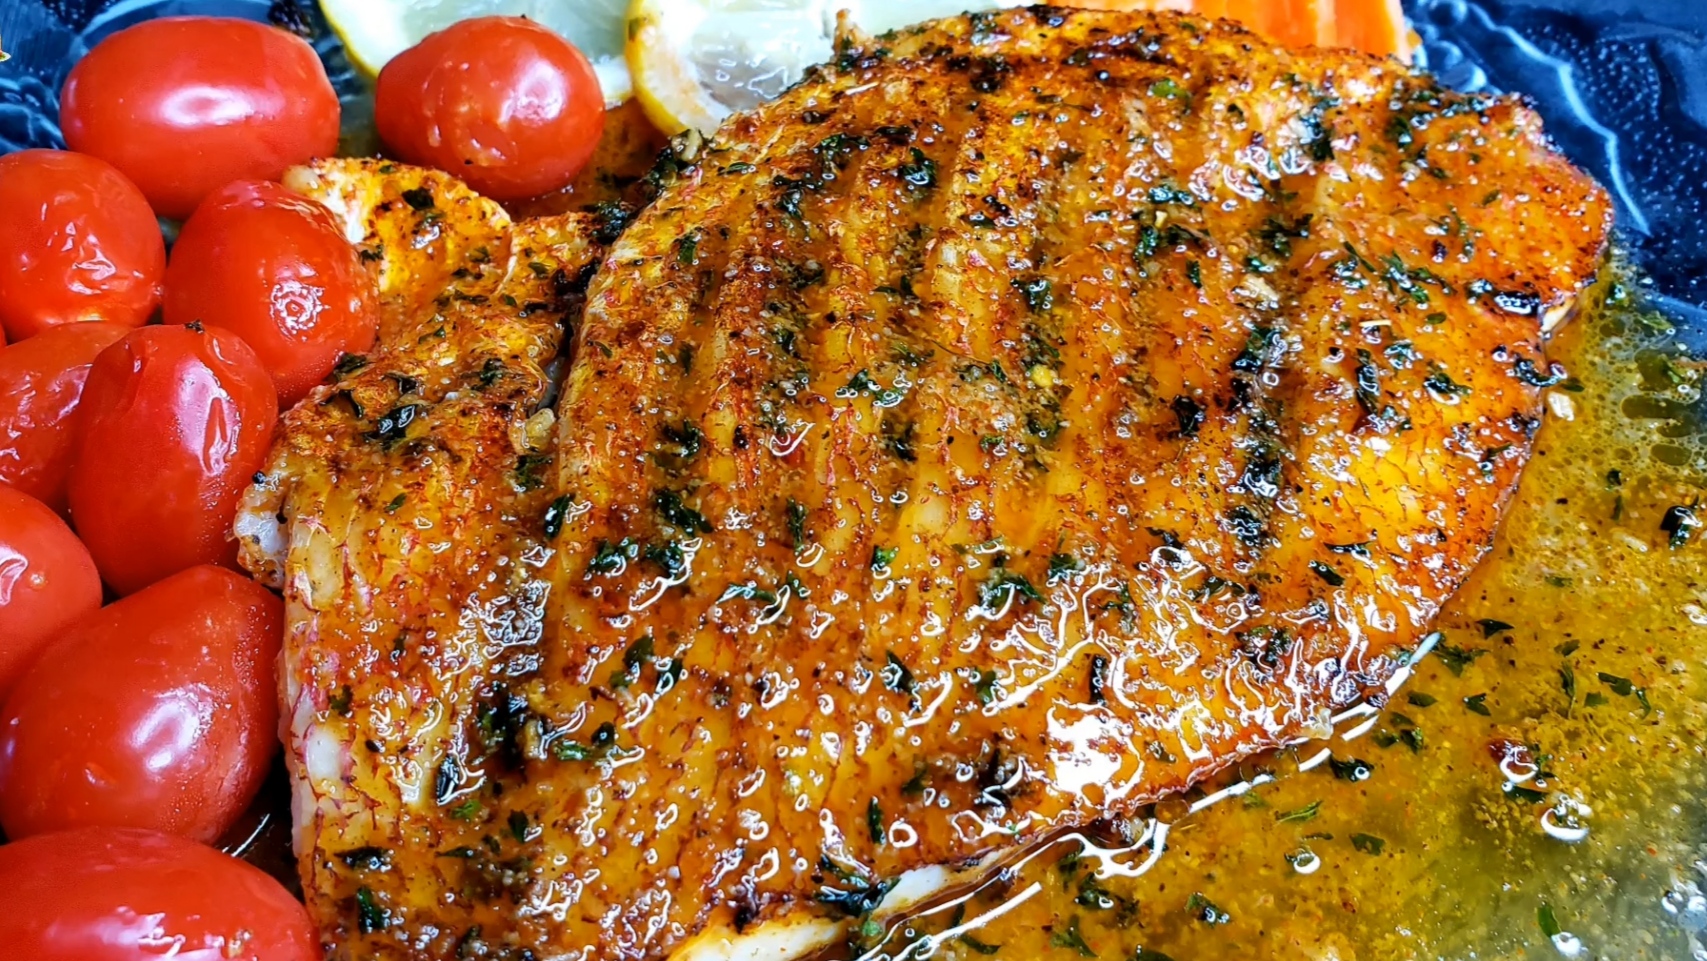 Delicious Baked Red Snapper Fish